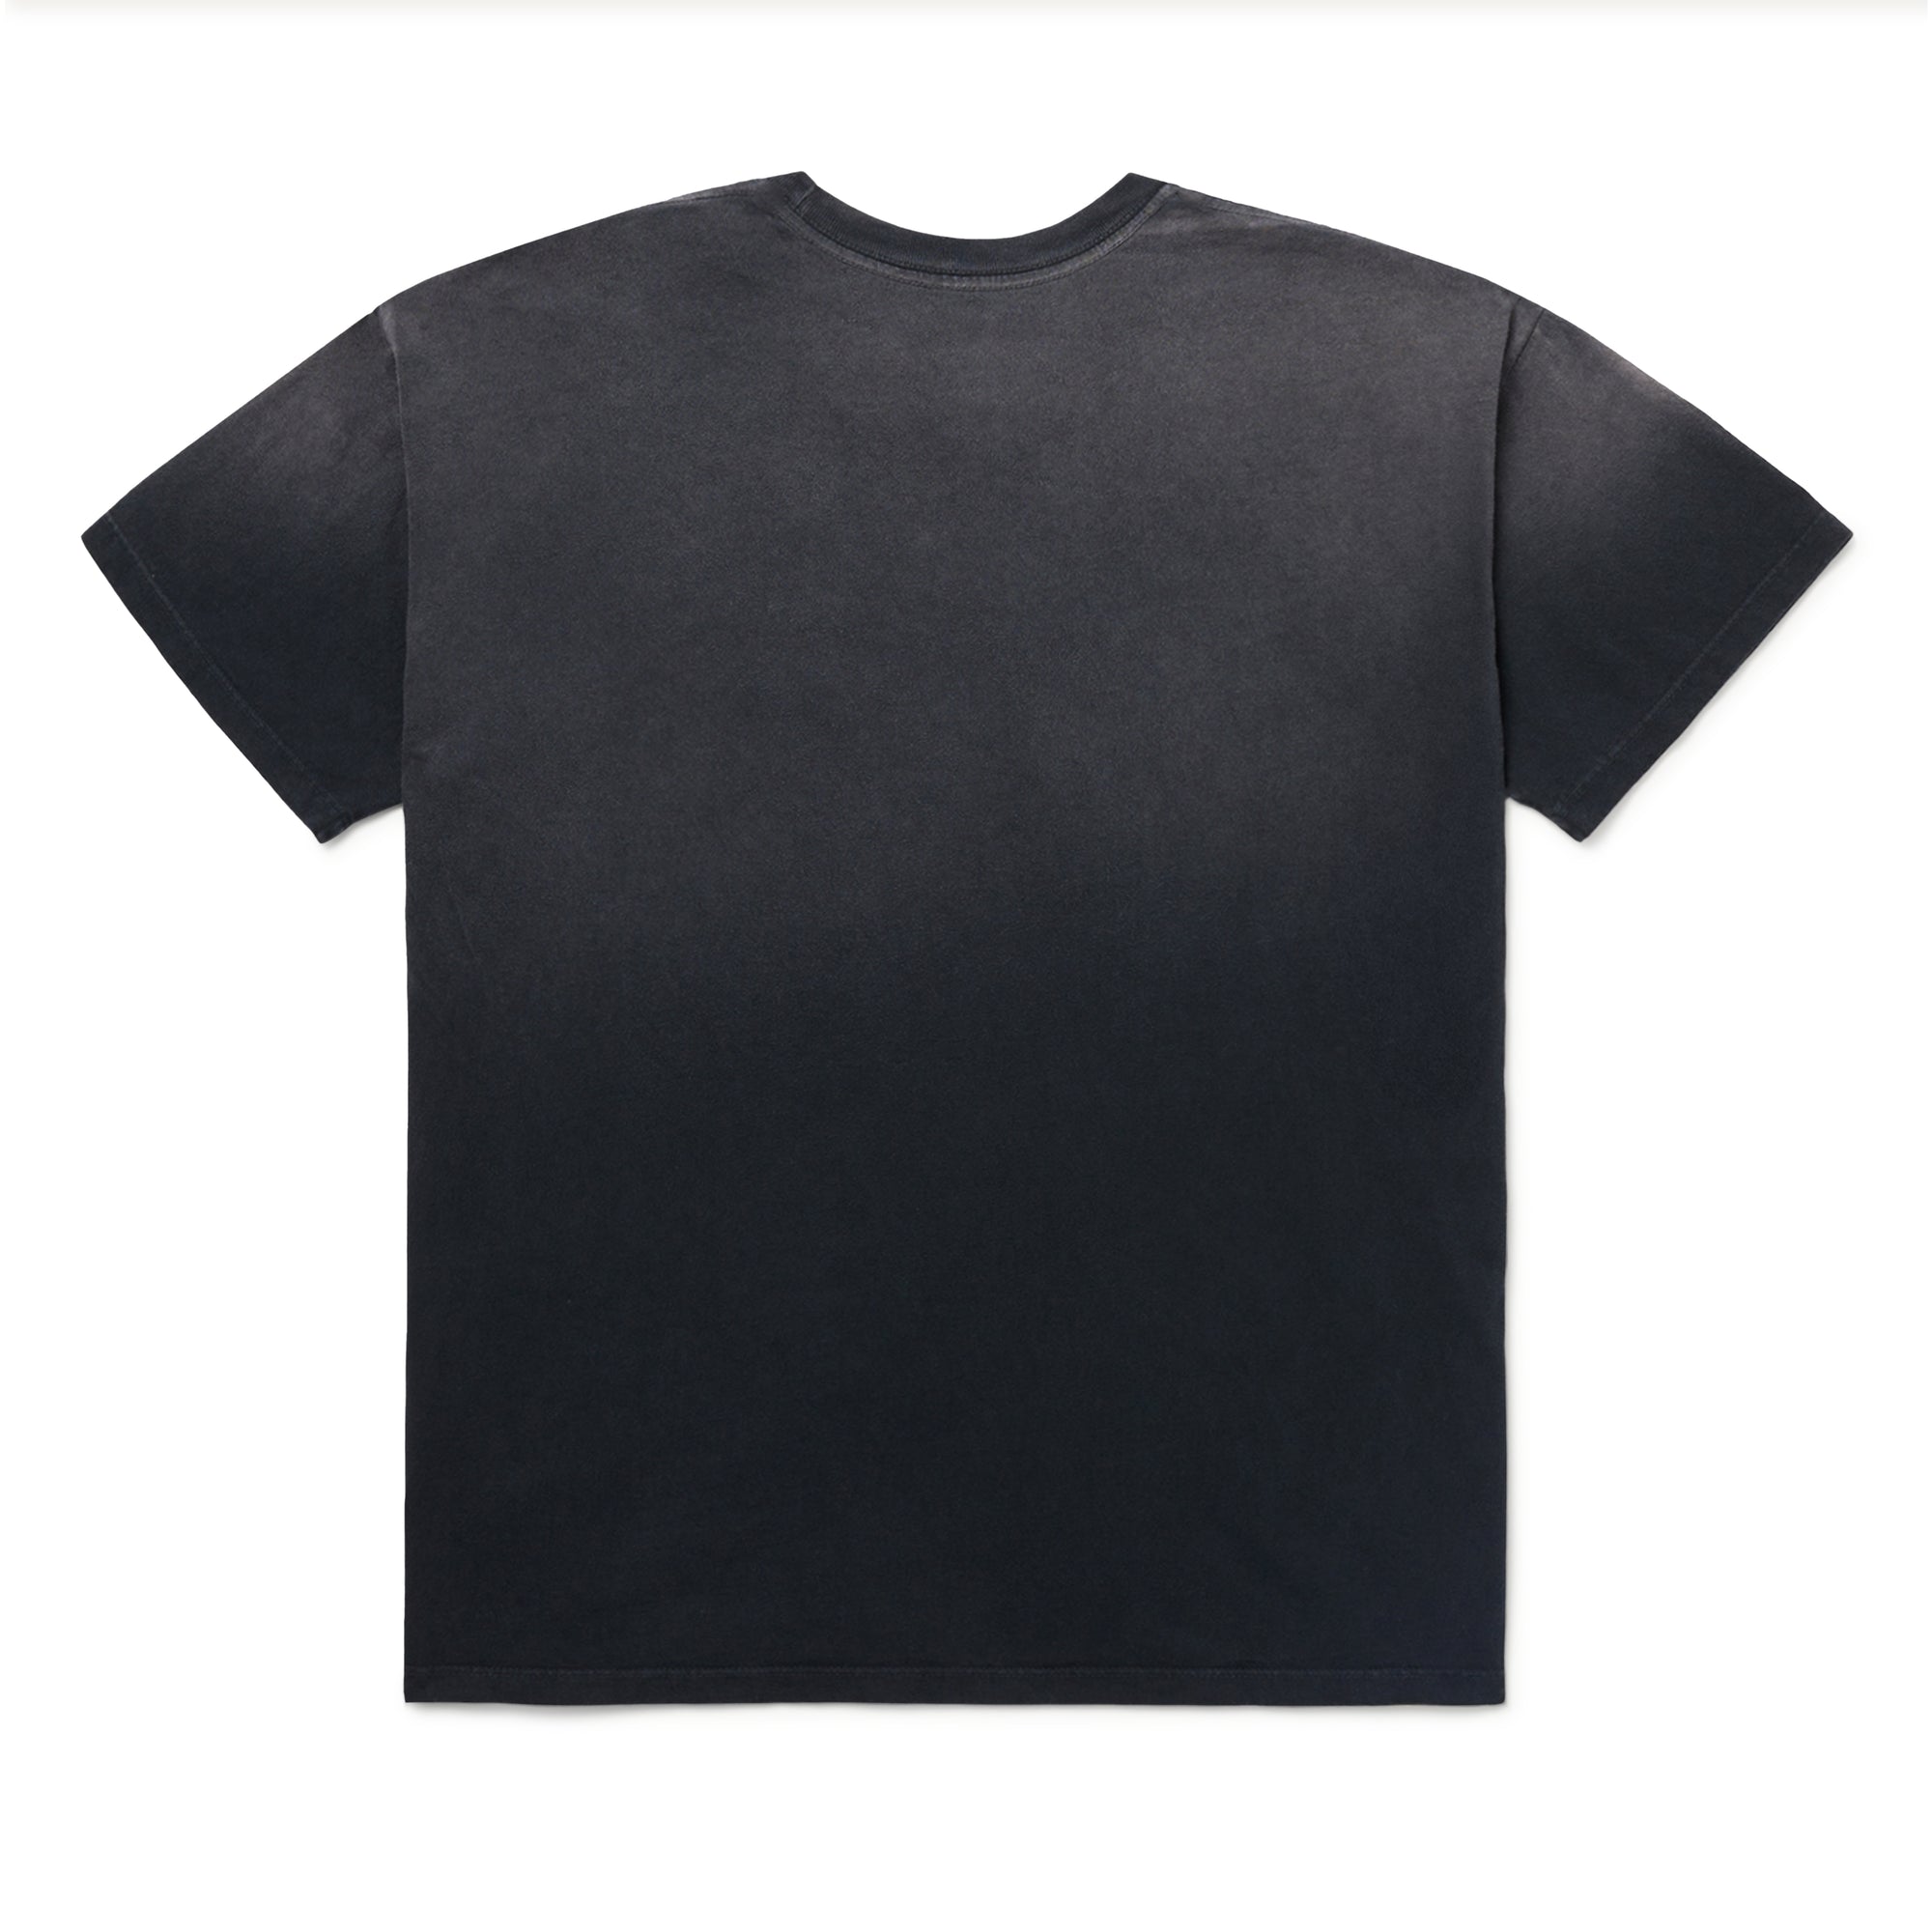 One of These Days - Burning Landscape Tee - (Black) view 2